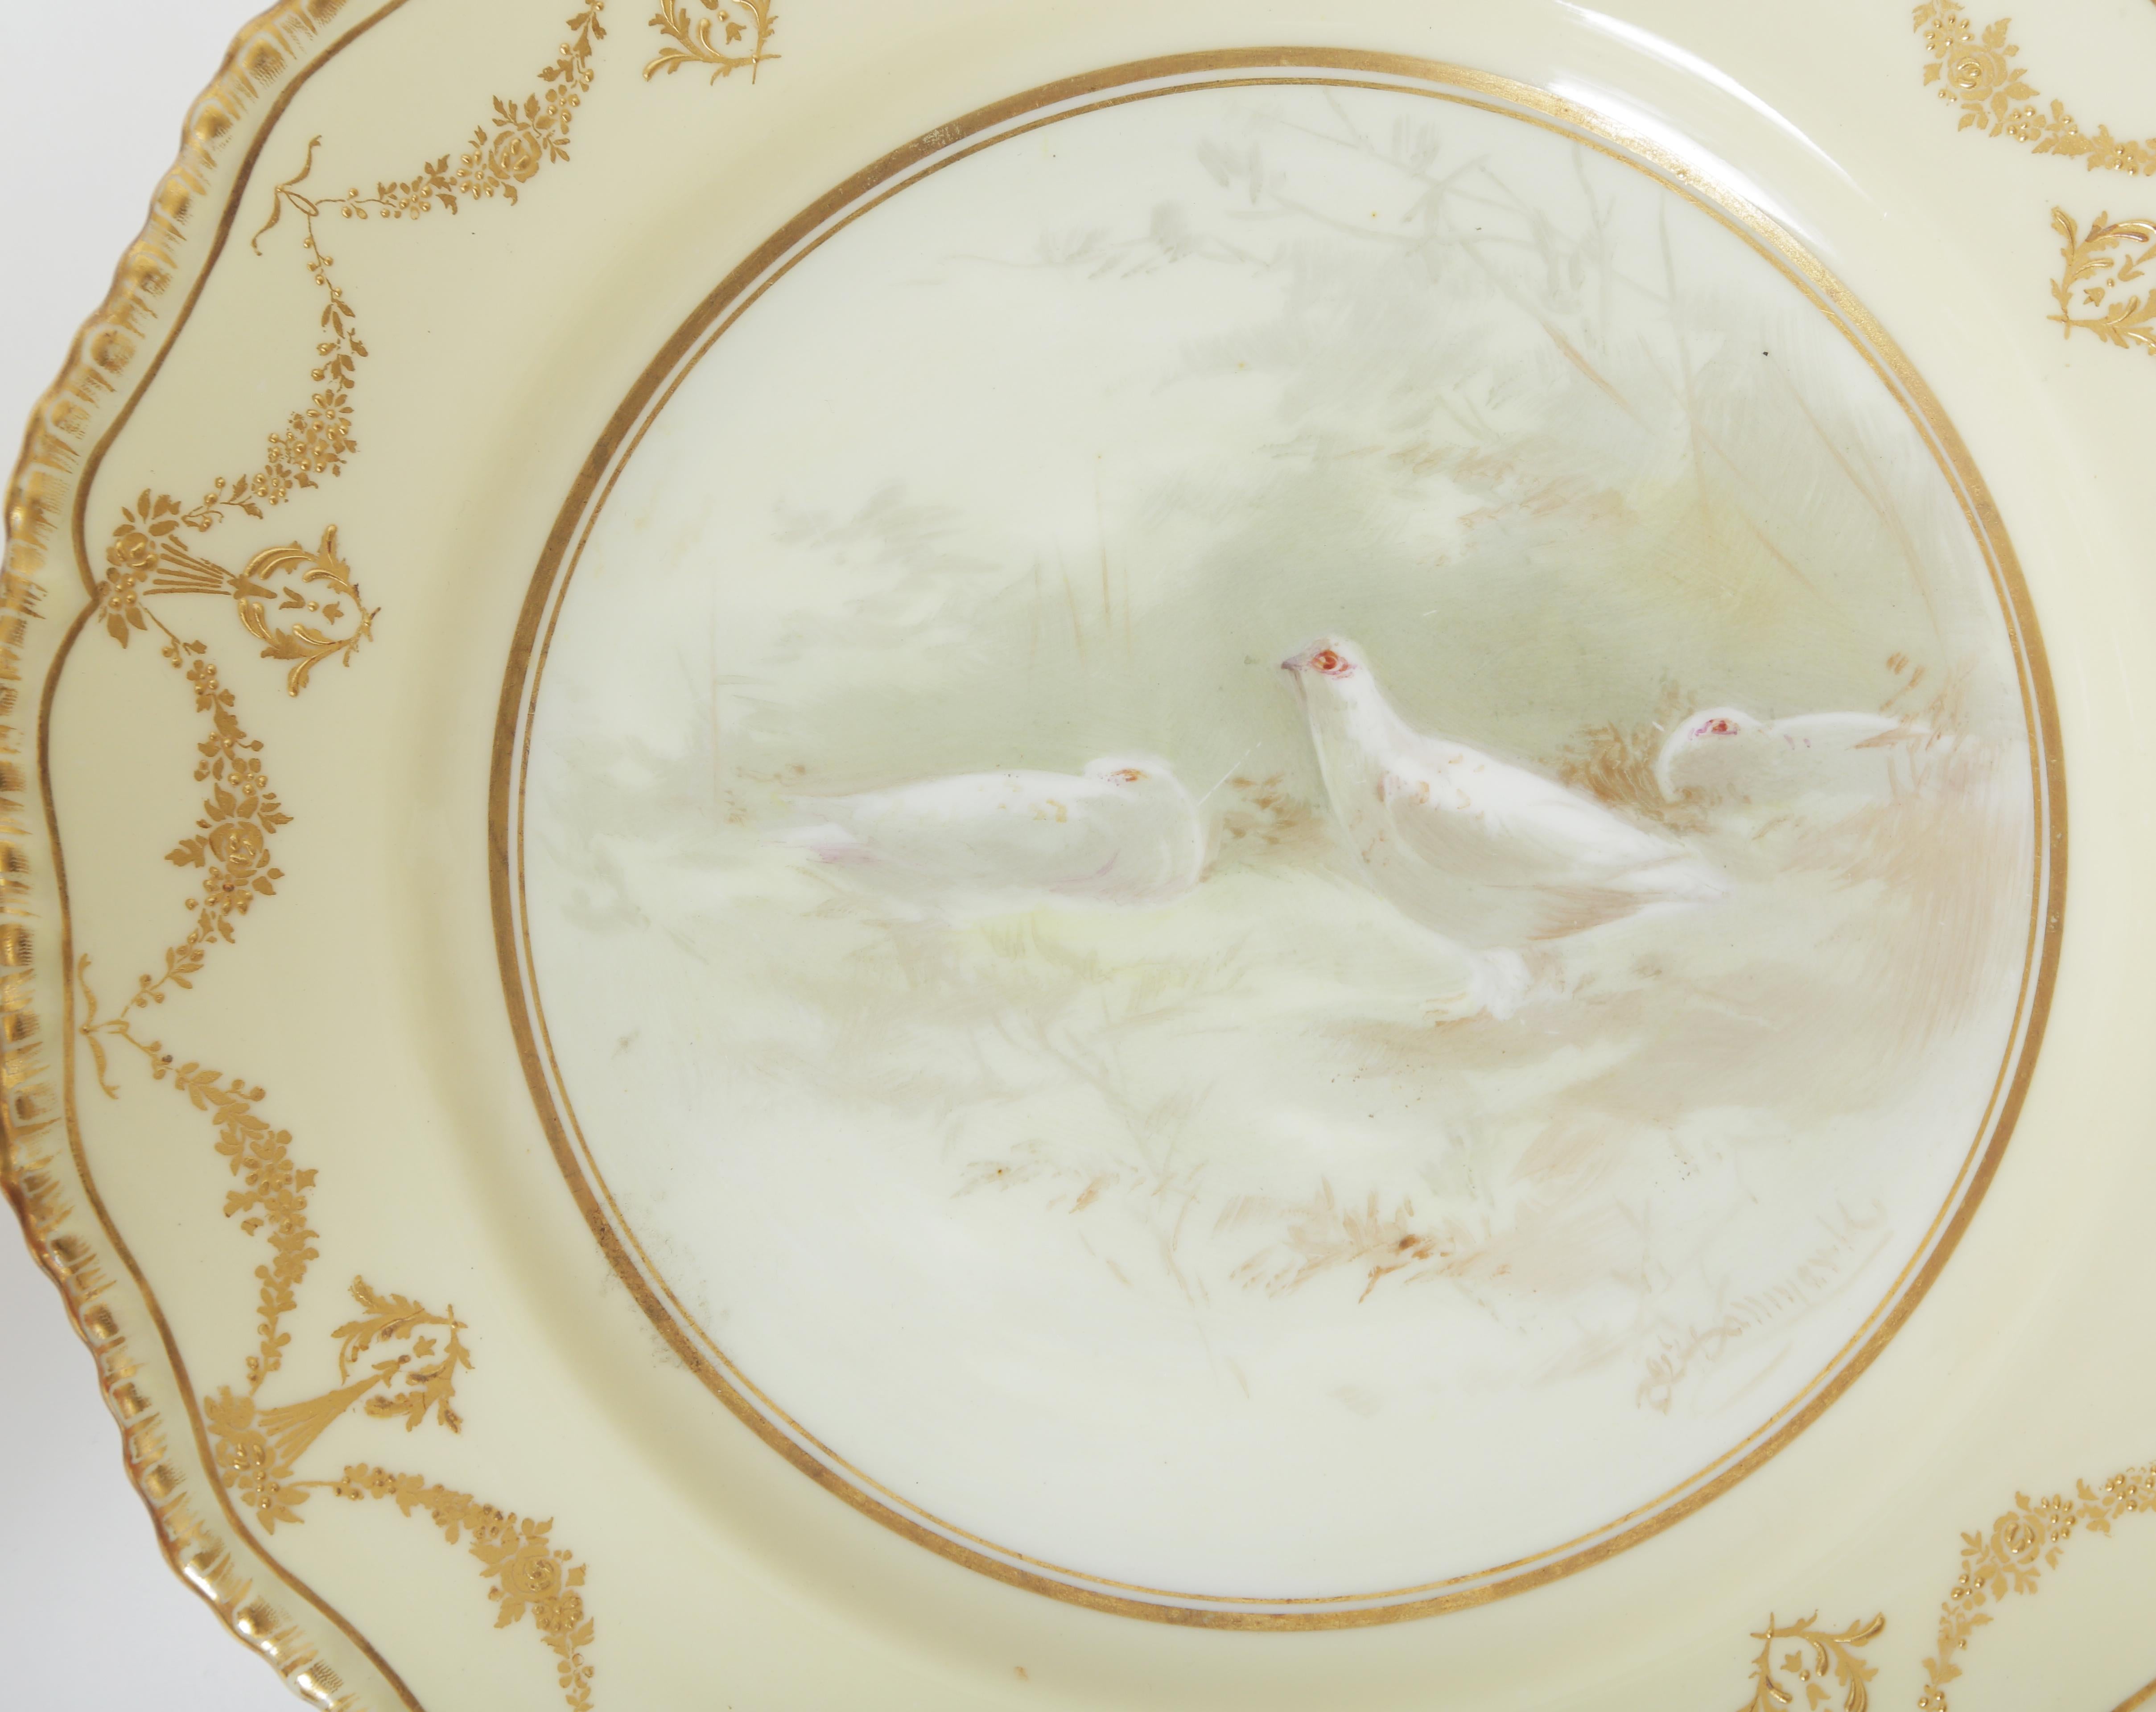 Ten Hand Painted Game Bird Plates, Raised Gold Accents, Antique English 2